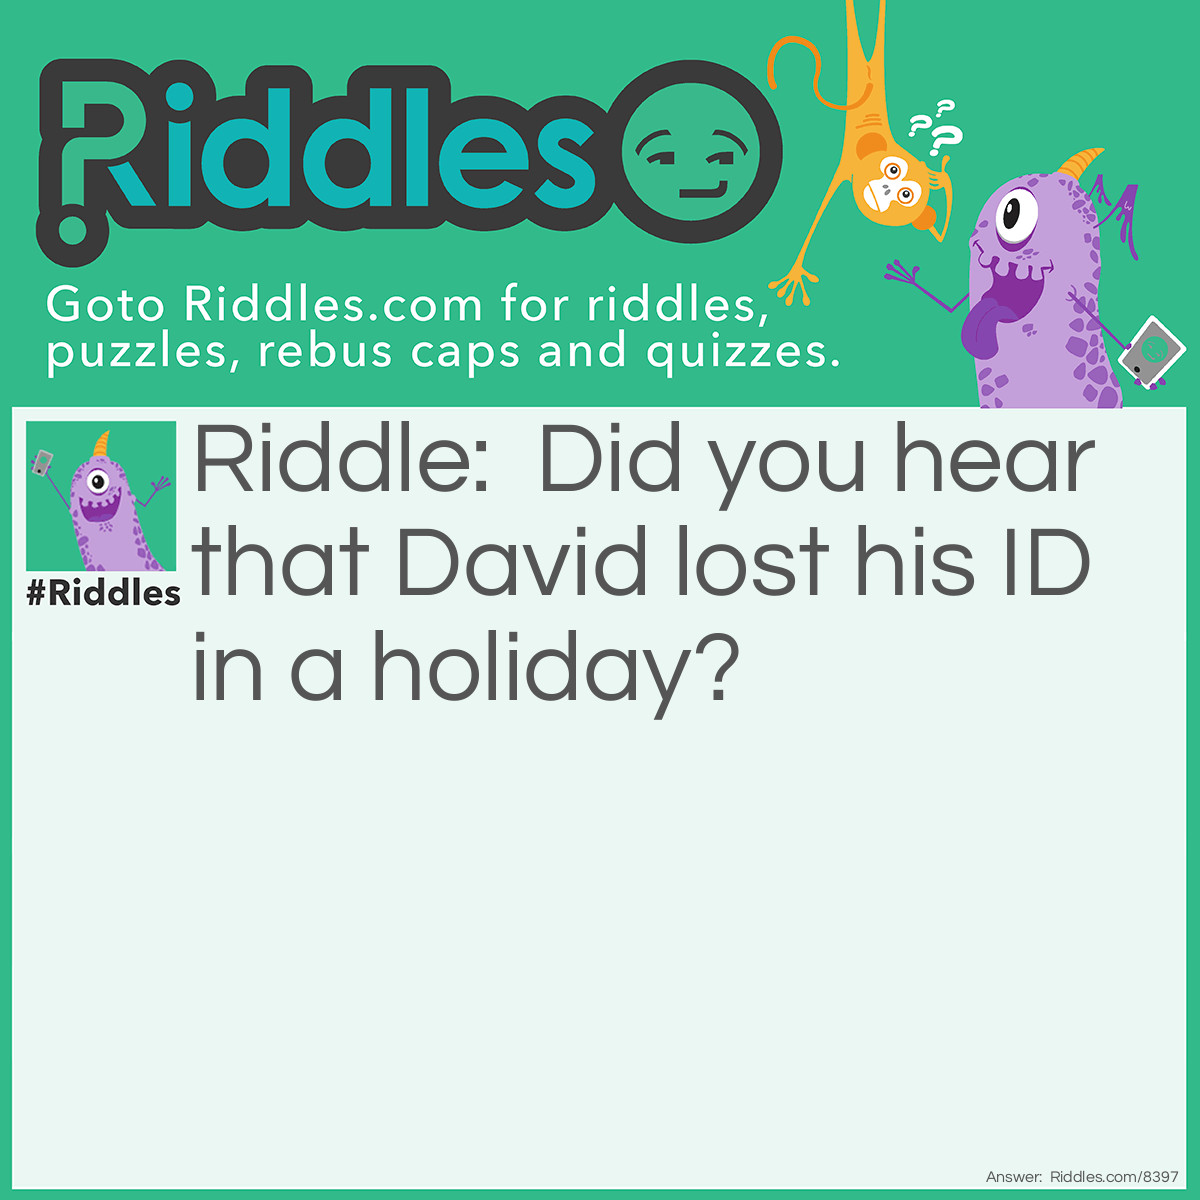 Riddle: Did you hear that David lost his ID in a holiday? Answer: Now we just have to call him 'Dav'.